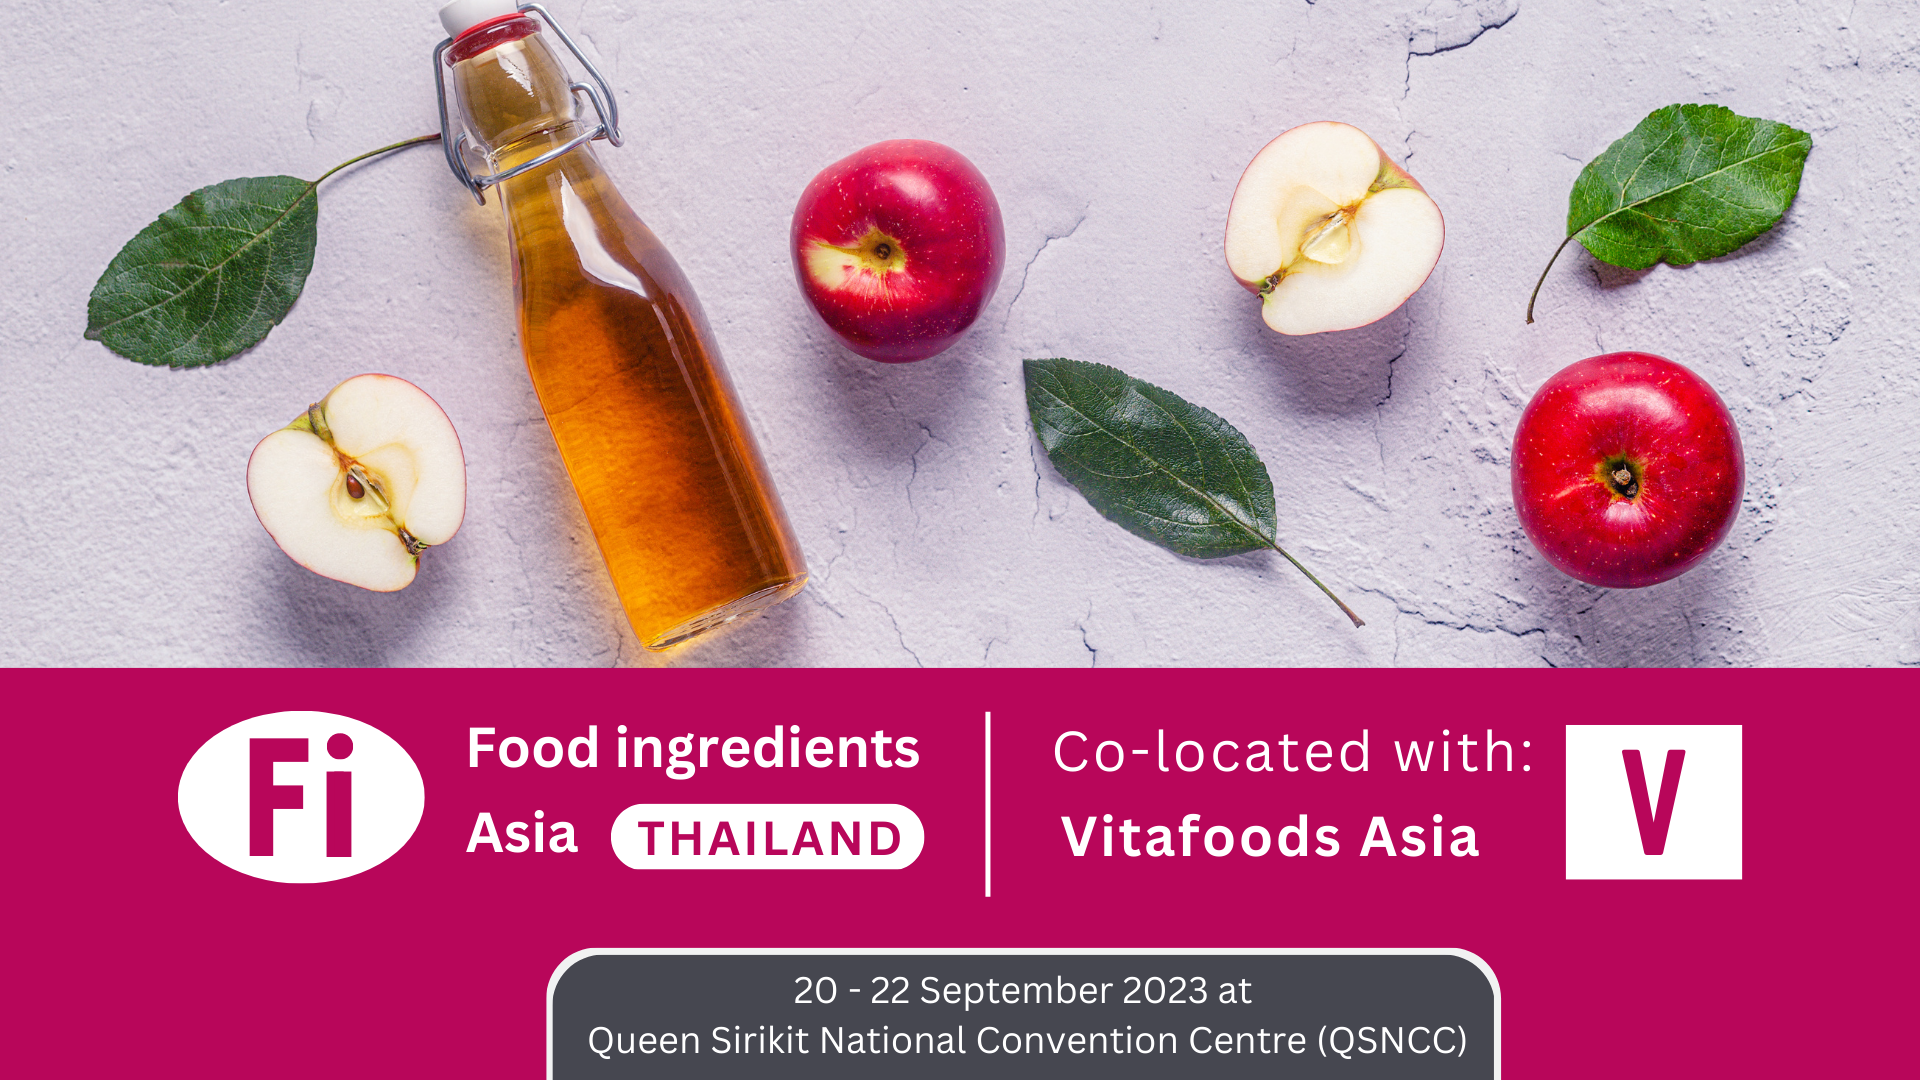 You are currently viewing Food ingredients Asia co-located with Vitafoods Asia Bangkok 2023